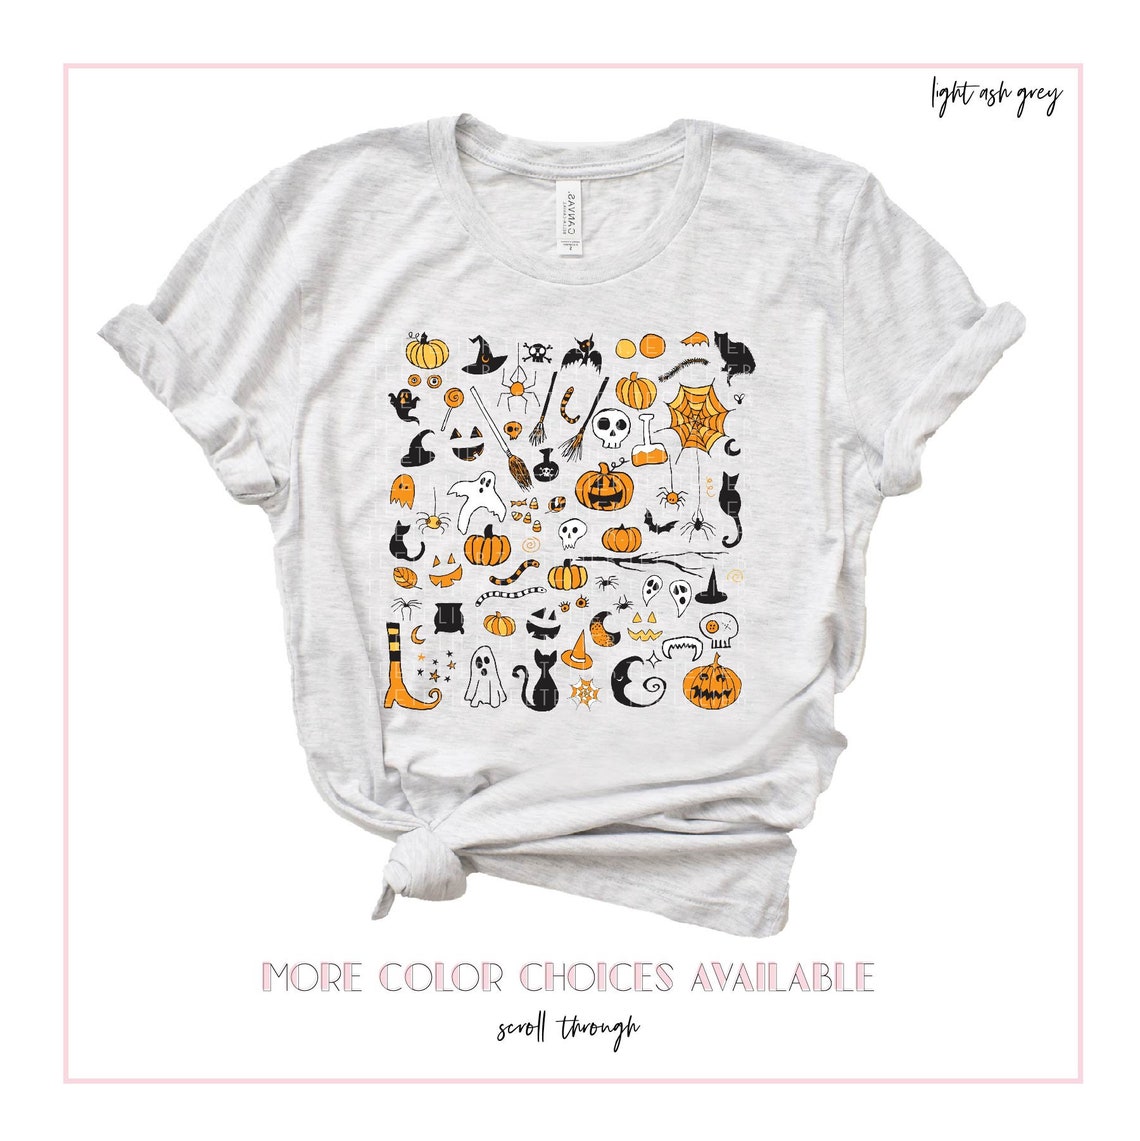 Halloween Little Things Doodles Shirt,Cute Halloween Shirt,Halloween Graphic Tee Shirt,Pumpkin Witch Ghost Spooky Mom TShirt,Matching Outfit